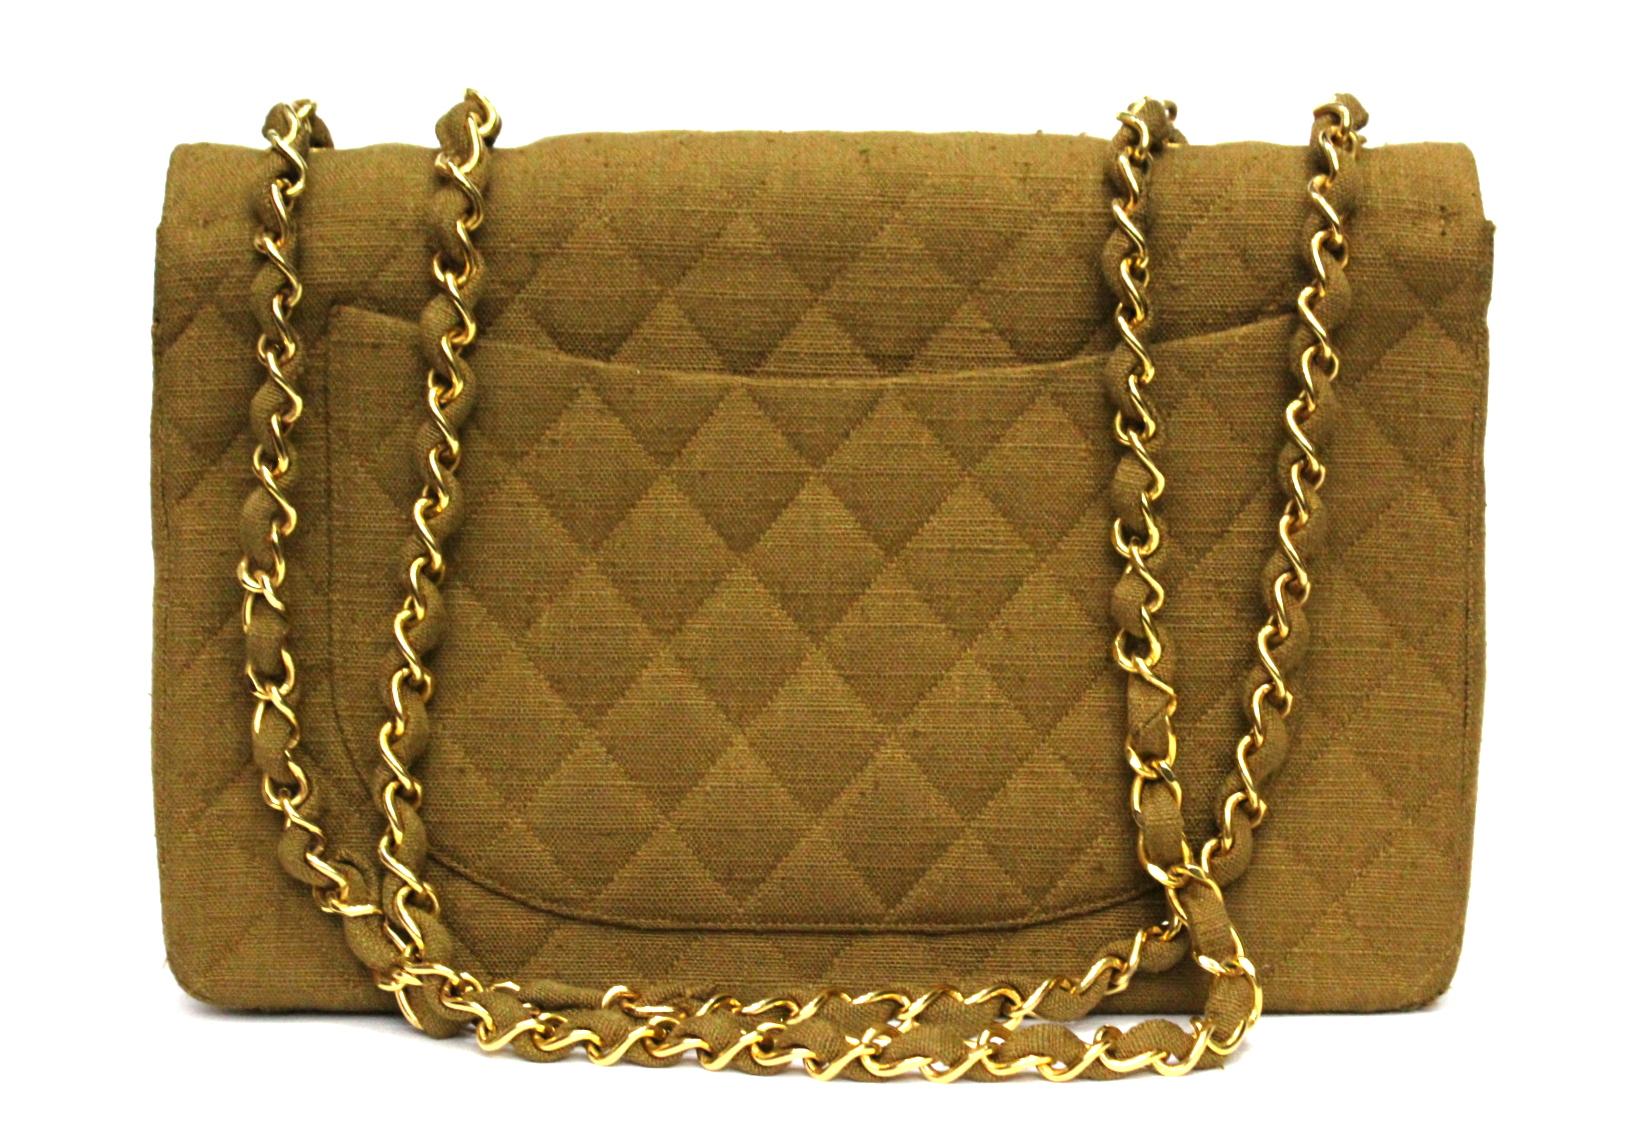 Chanel Maxi Jumbo Vintage
Beige Canvas 
Gold Hardware
Very good condition